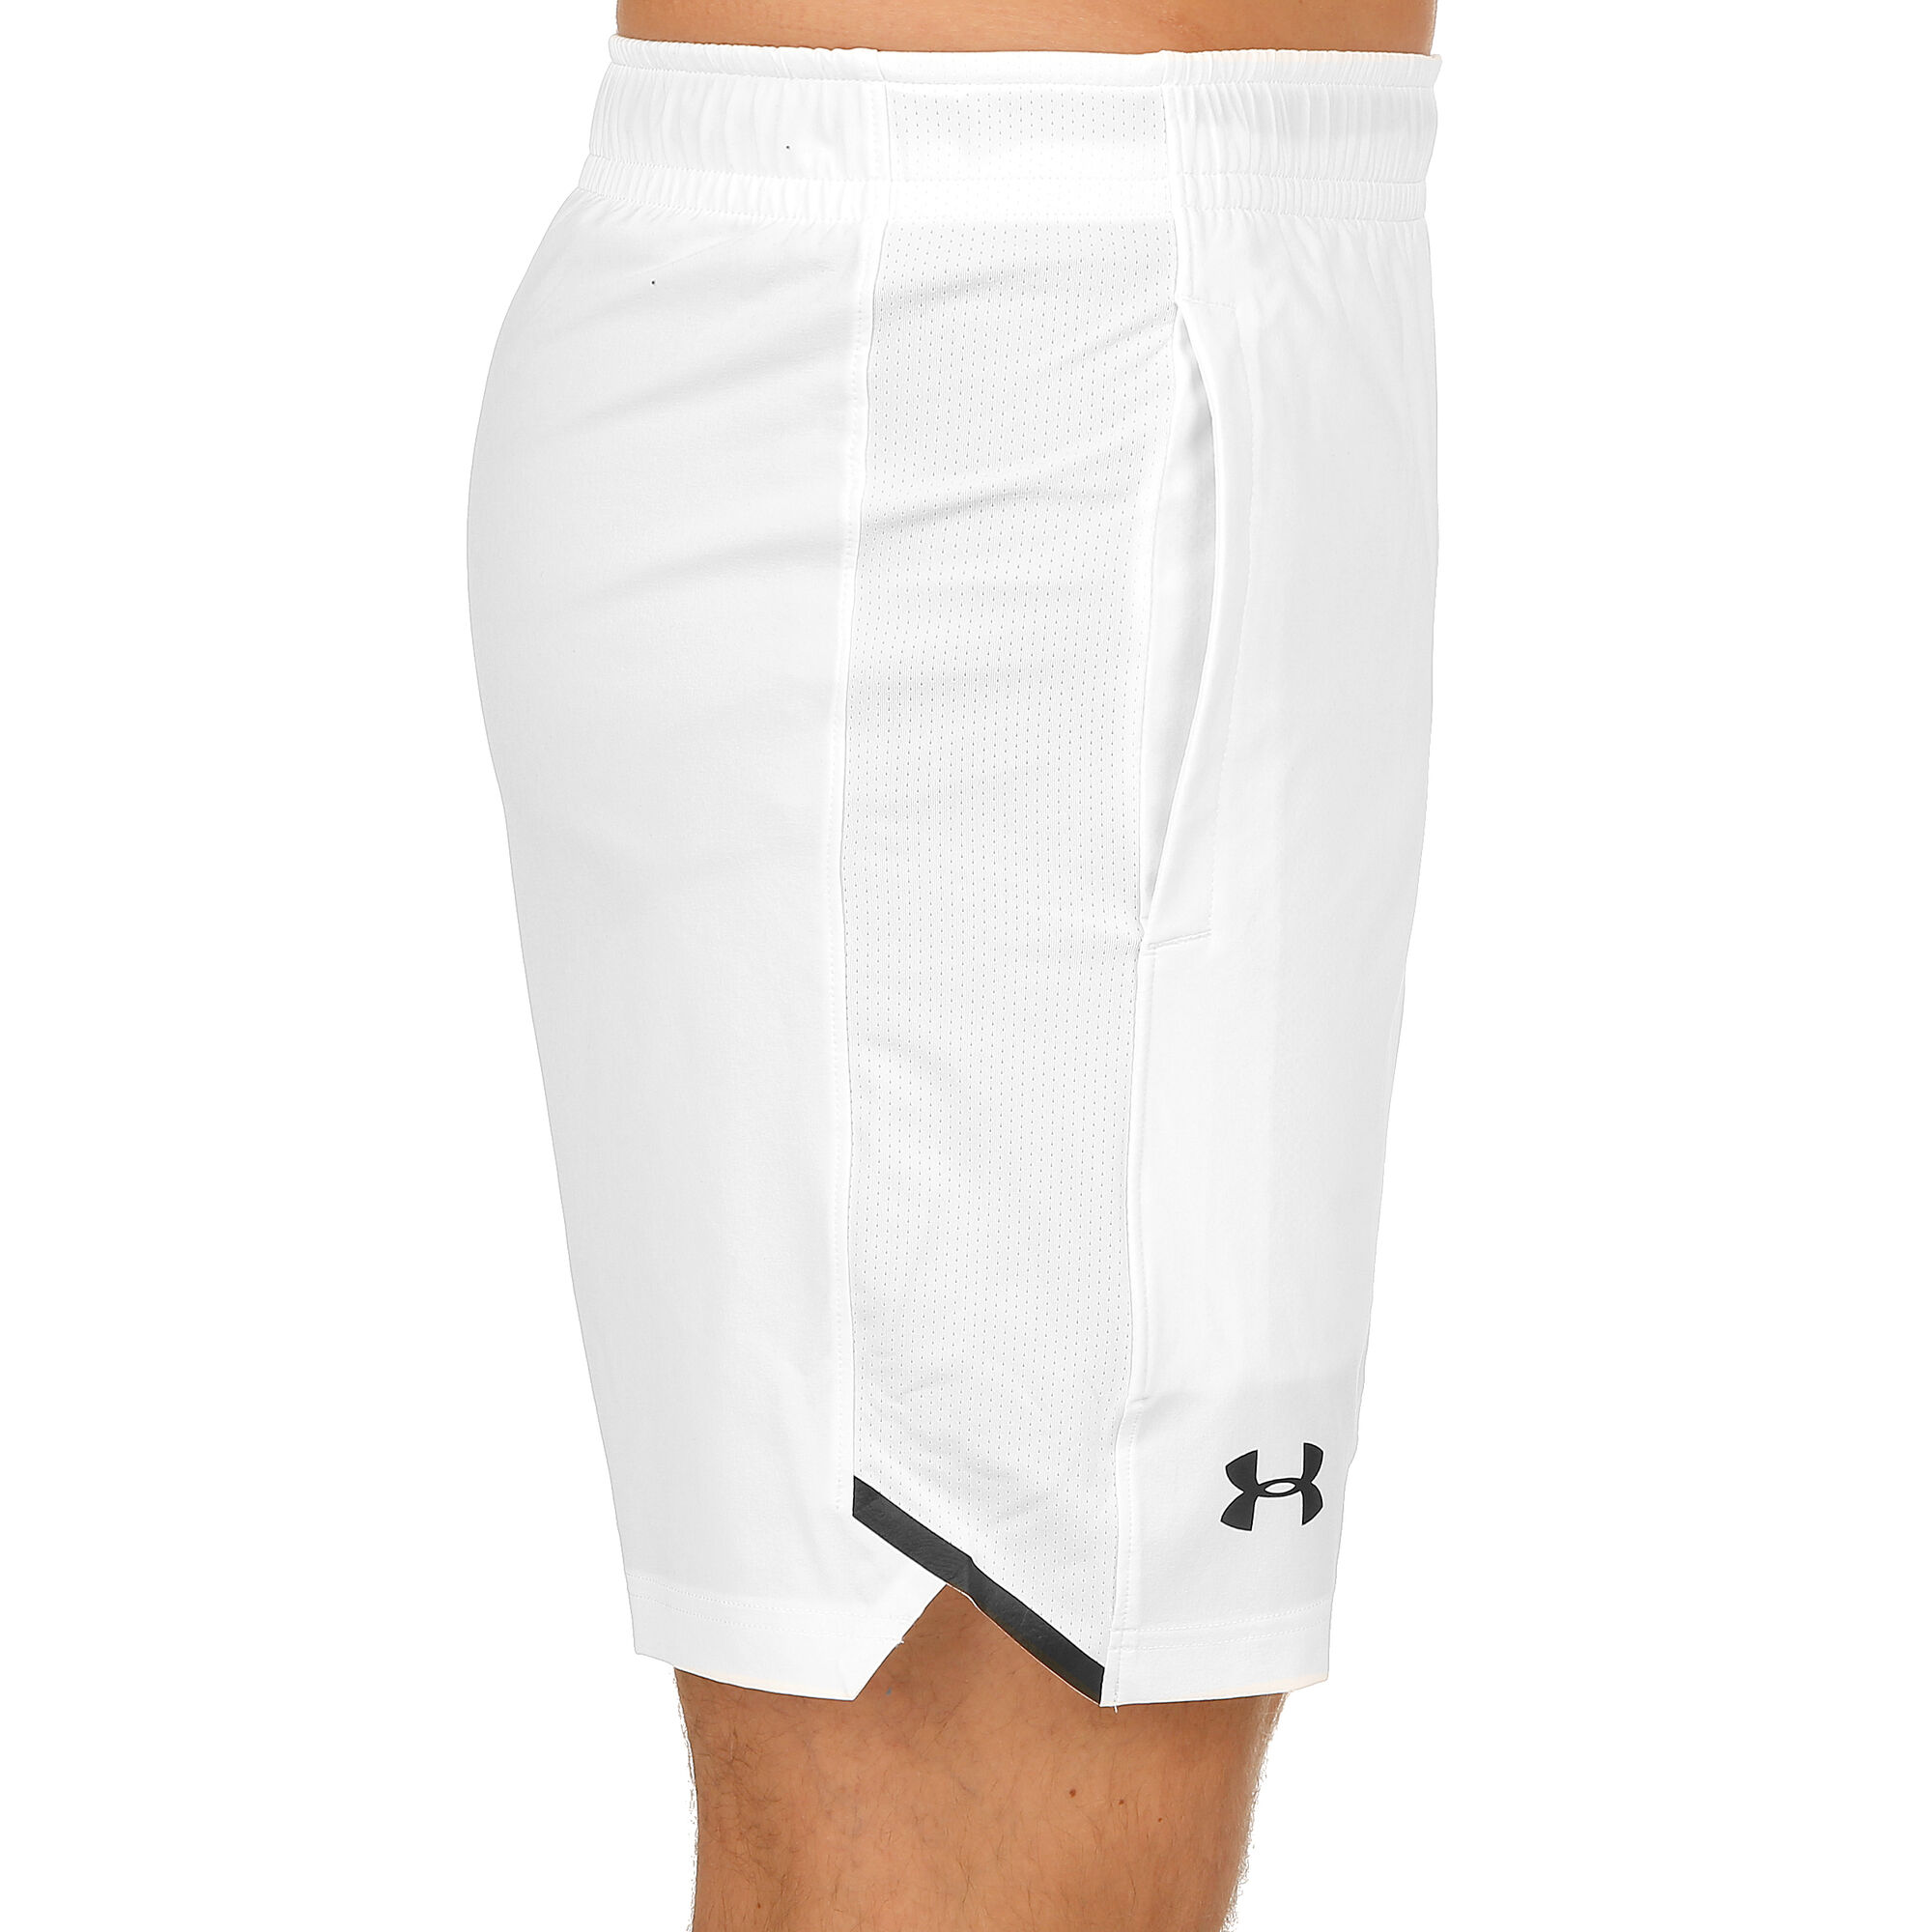 Under Armour Forge 7in Tennis Shorts Hombres - Blanco, Gris compra online |